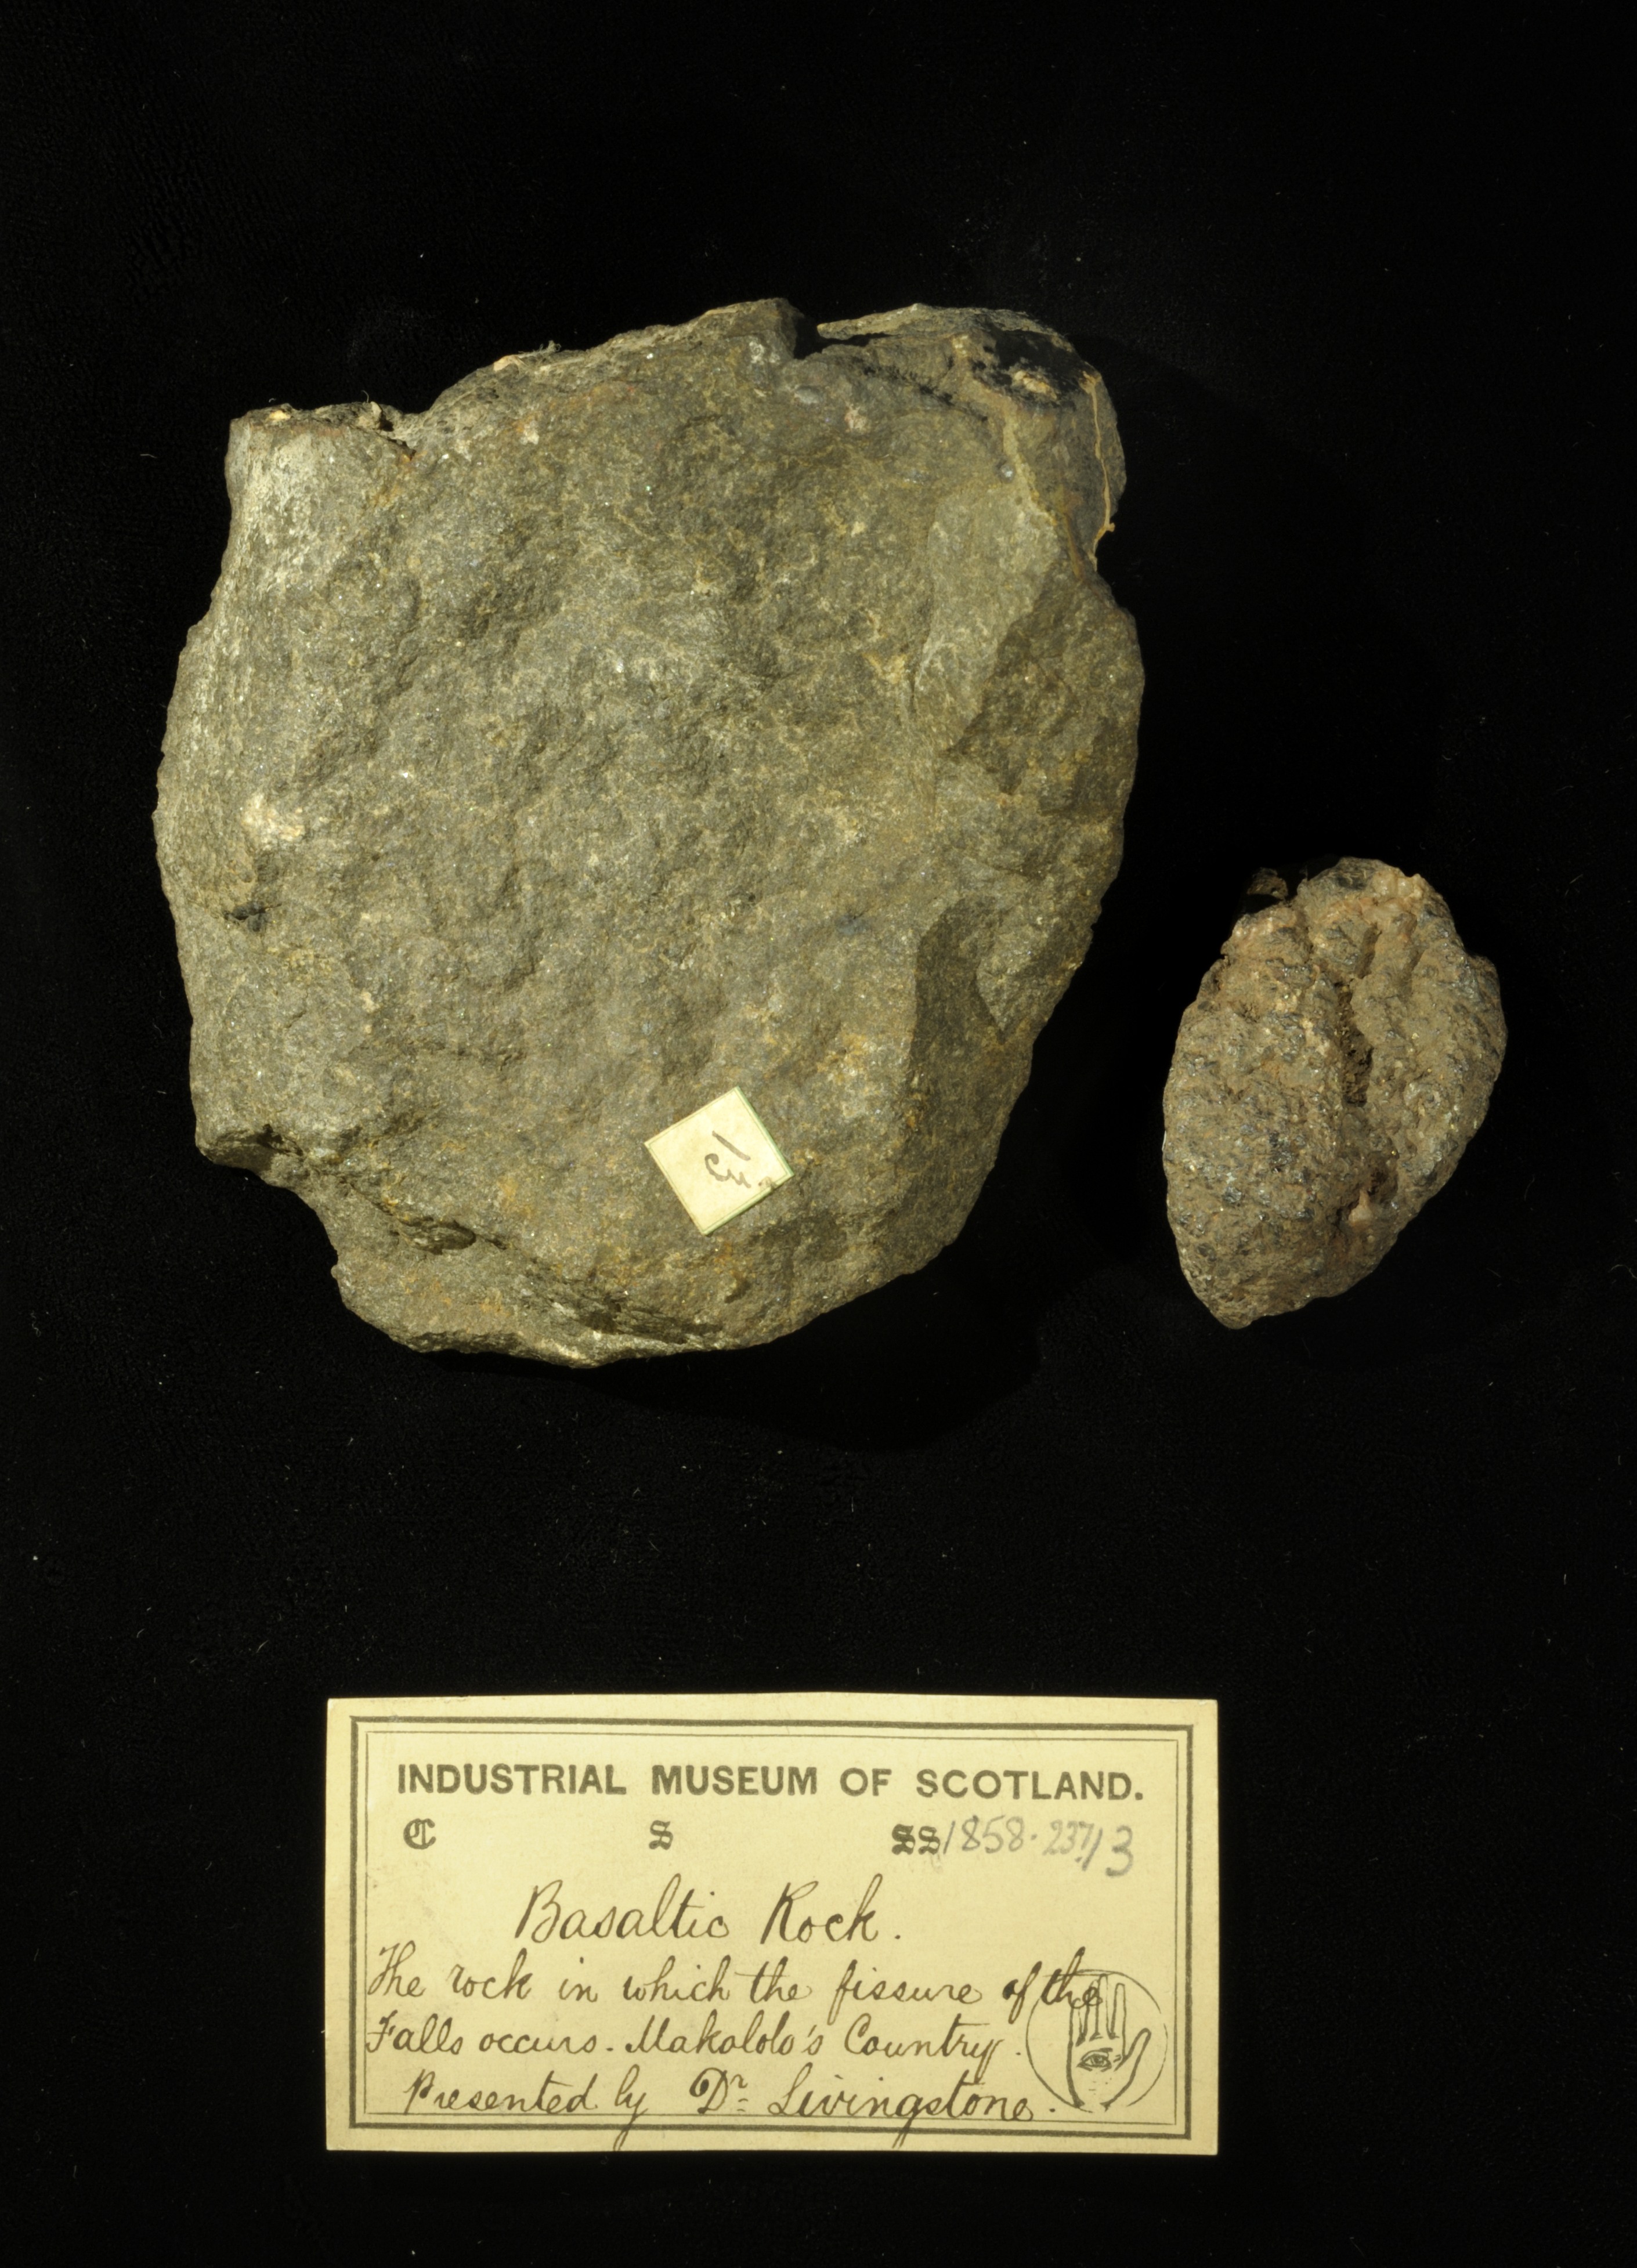 Specimens of basalt rock with 19th century museum label: ‘Basaltic rock. The rock in which the fissure of the falls occurs. Makolo’s country. Presented by Dr Livingstone.’